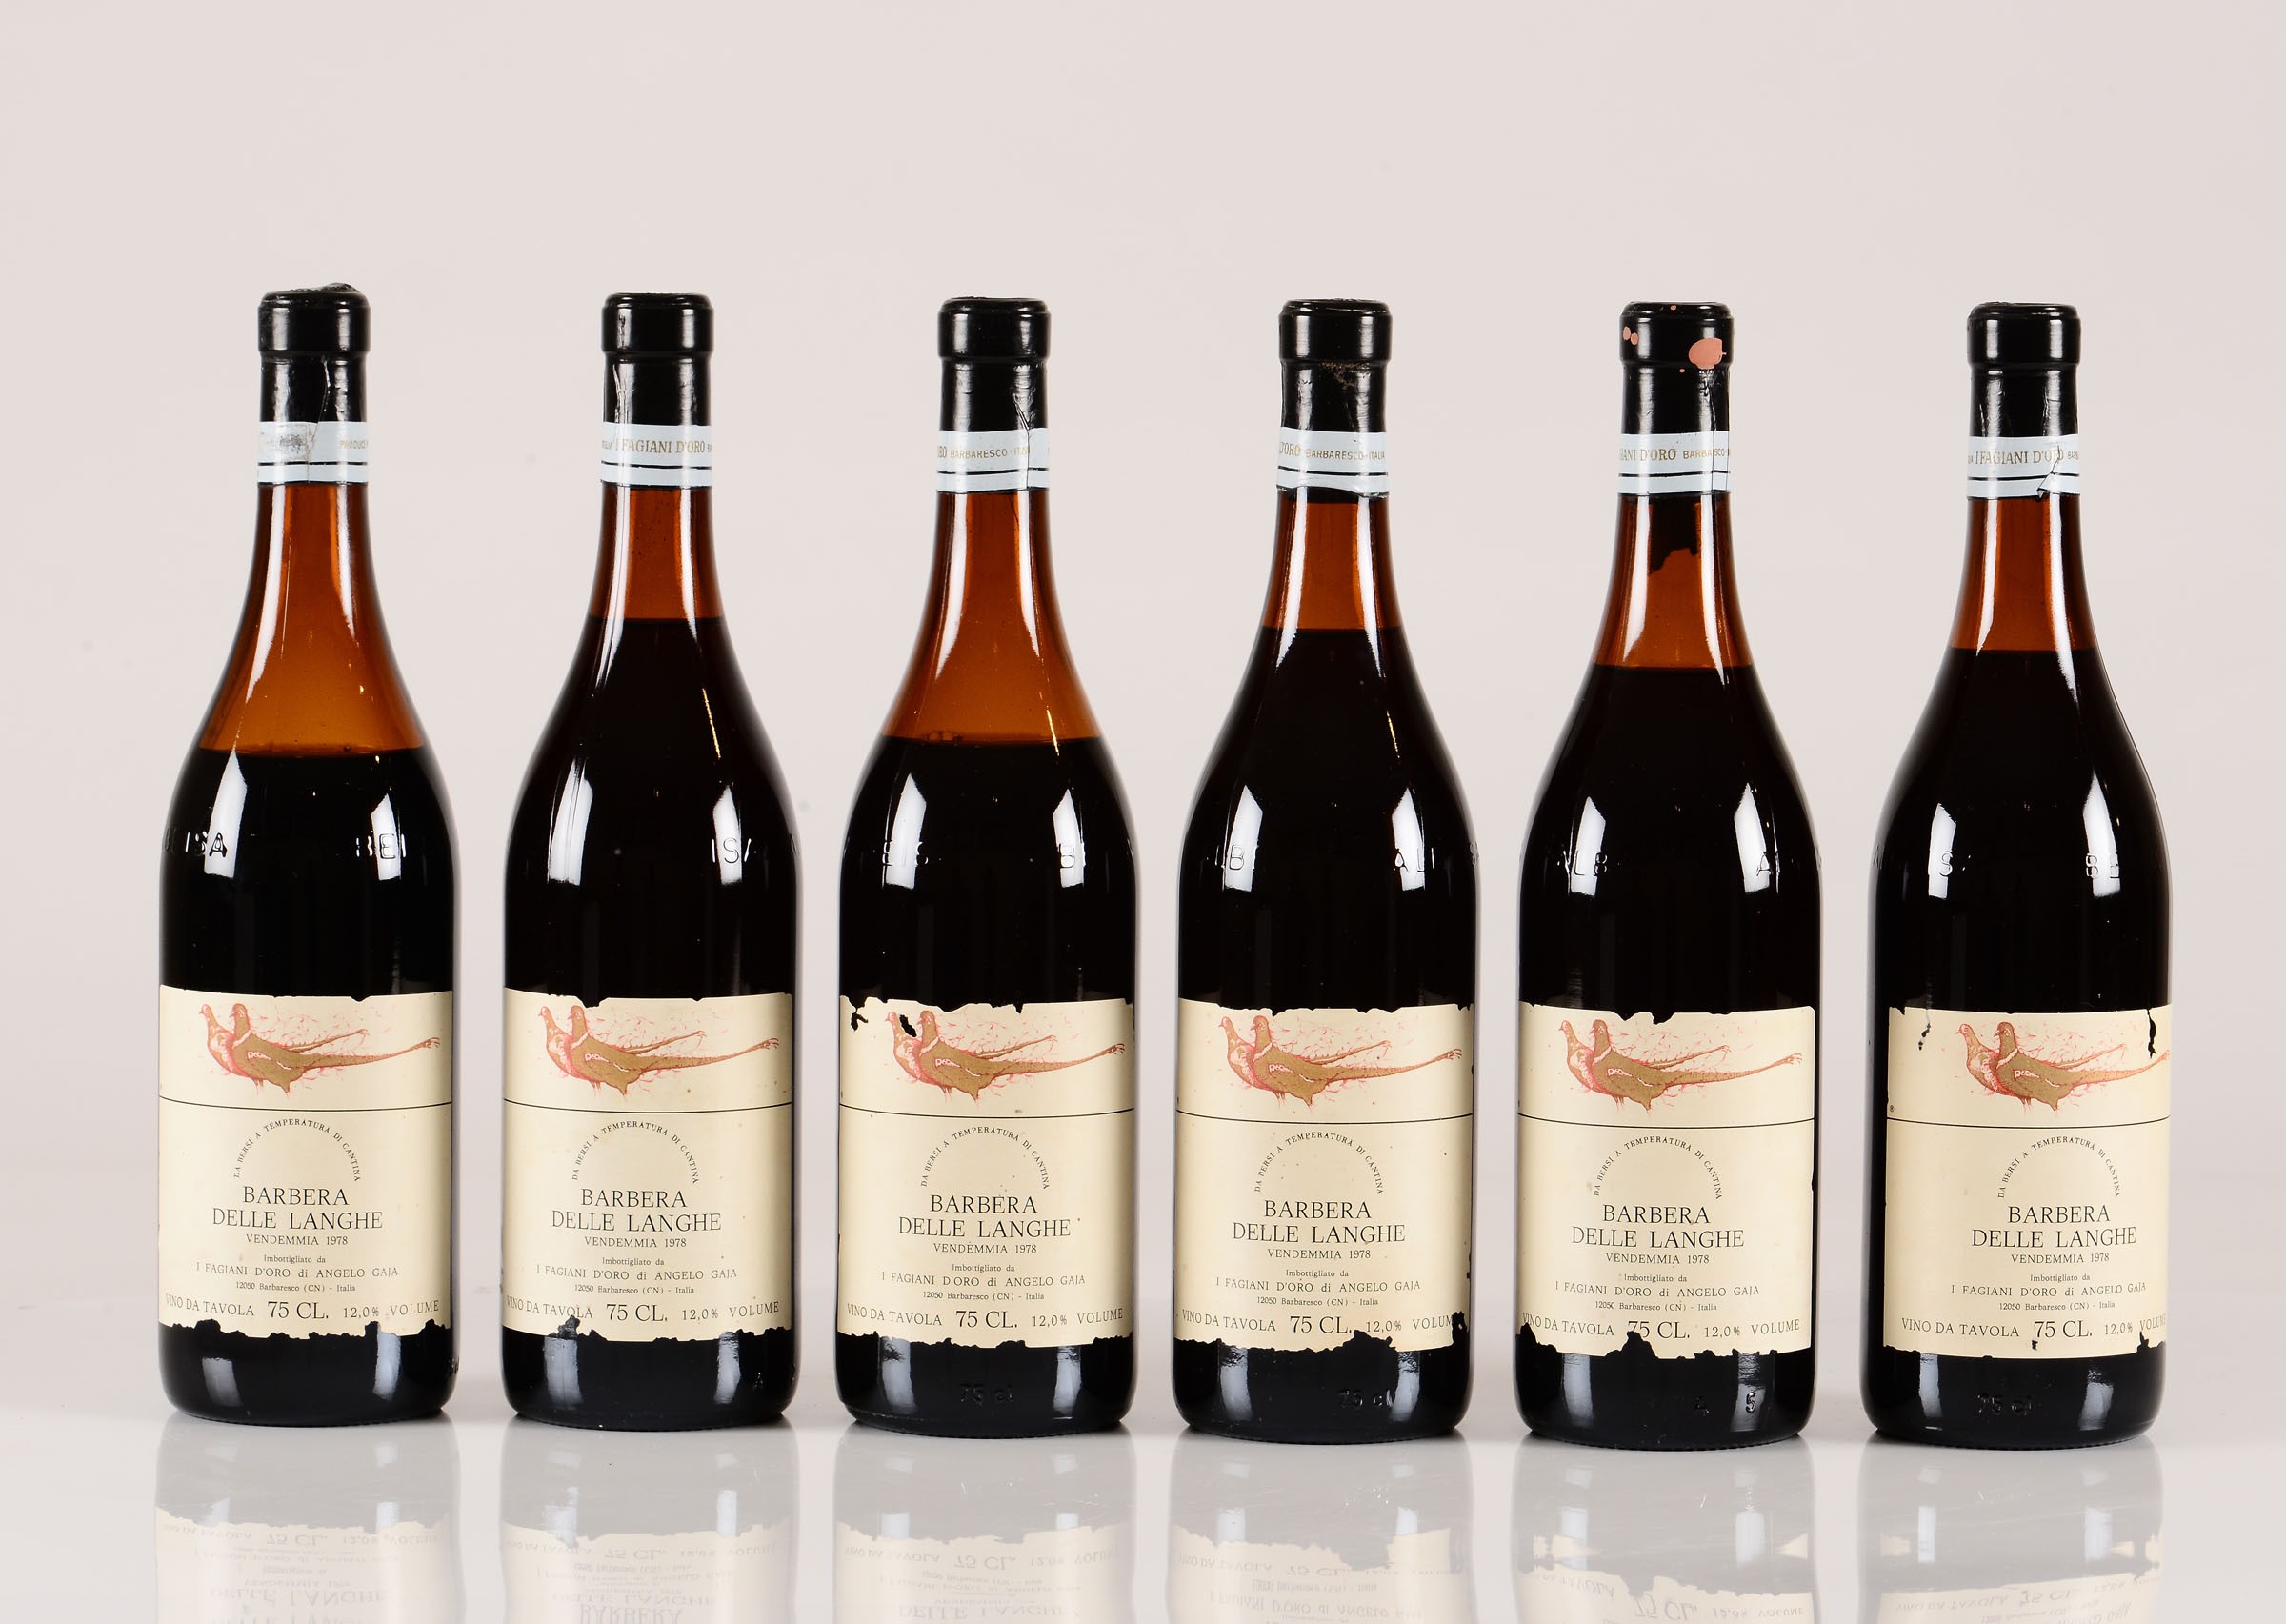 Barbera delle Langhe, I Fagiani d'Oro, 1978, - 12 bts 3 TS, 2 S, 1 MS, 1 LS, 5 BS [...] - Image 2 of 4